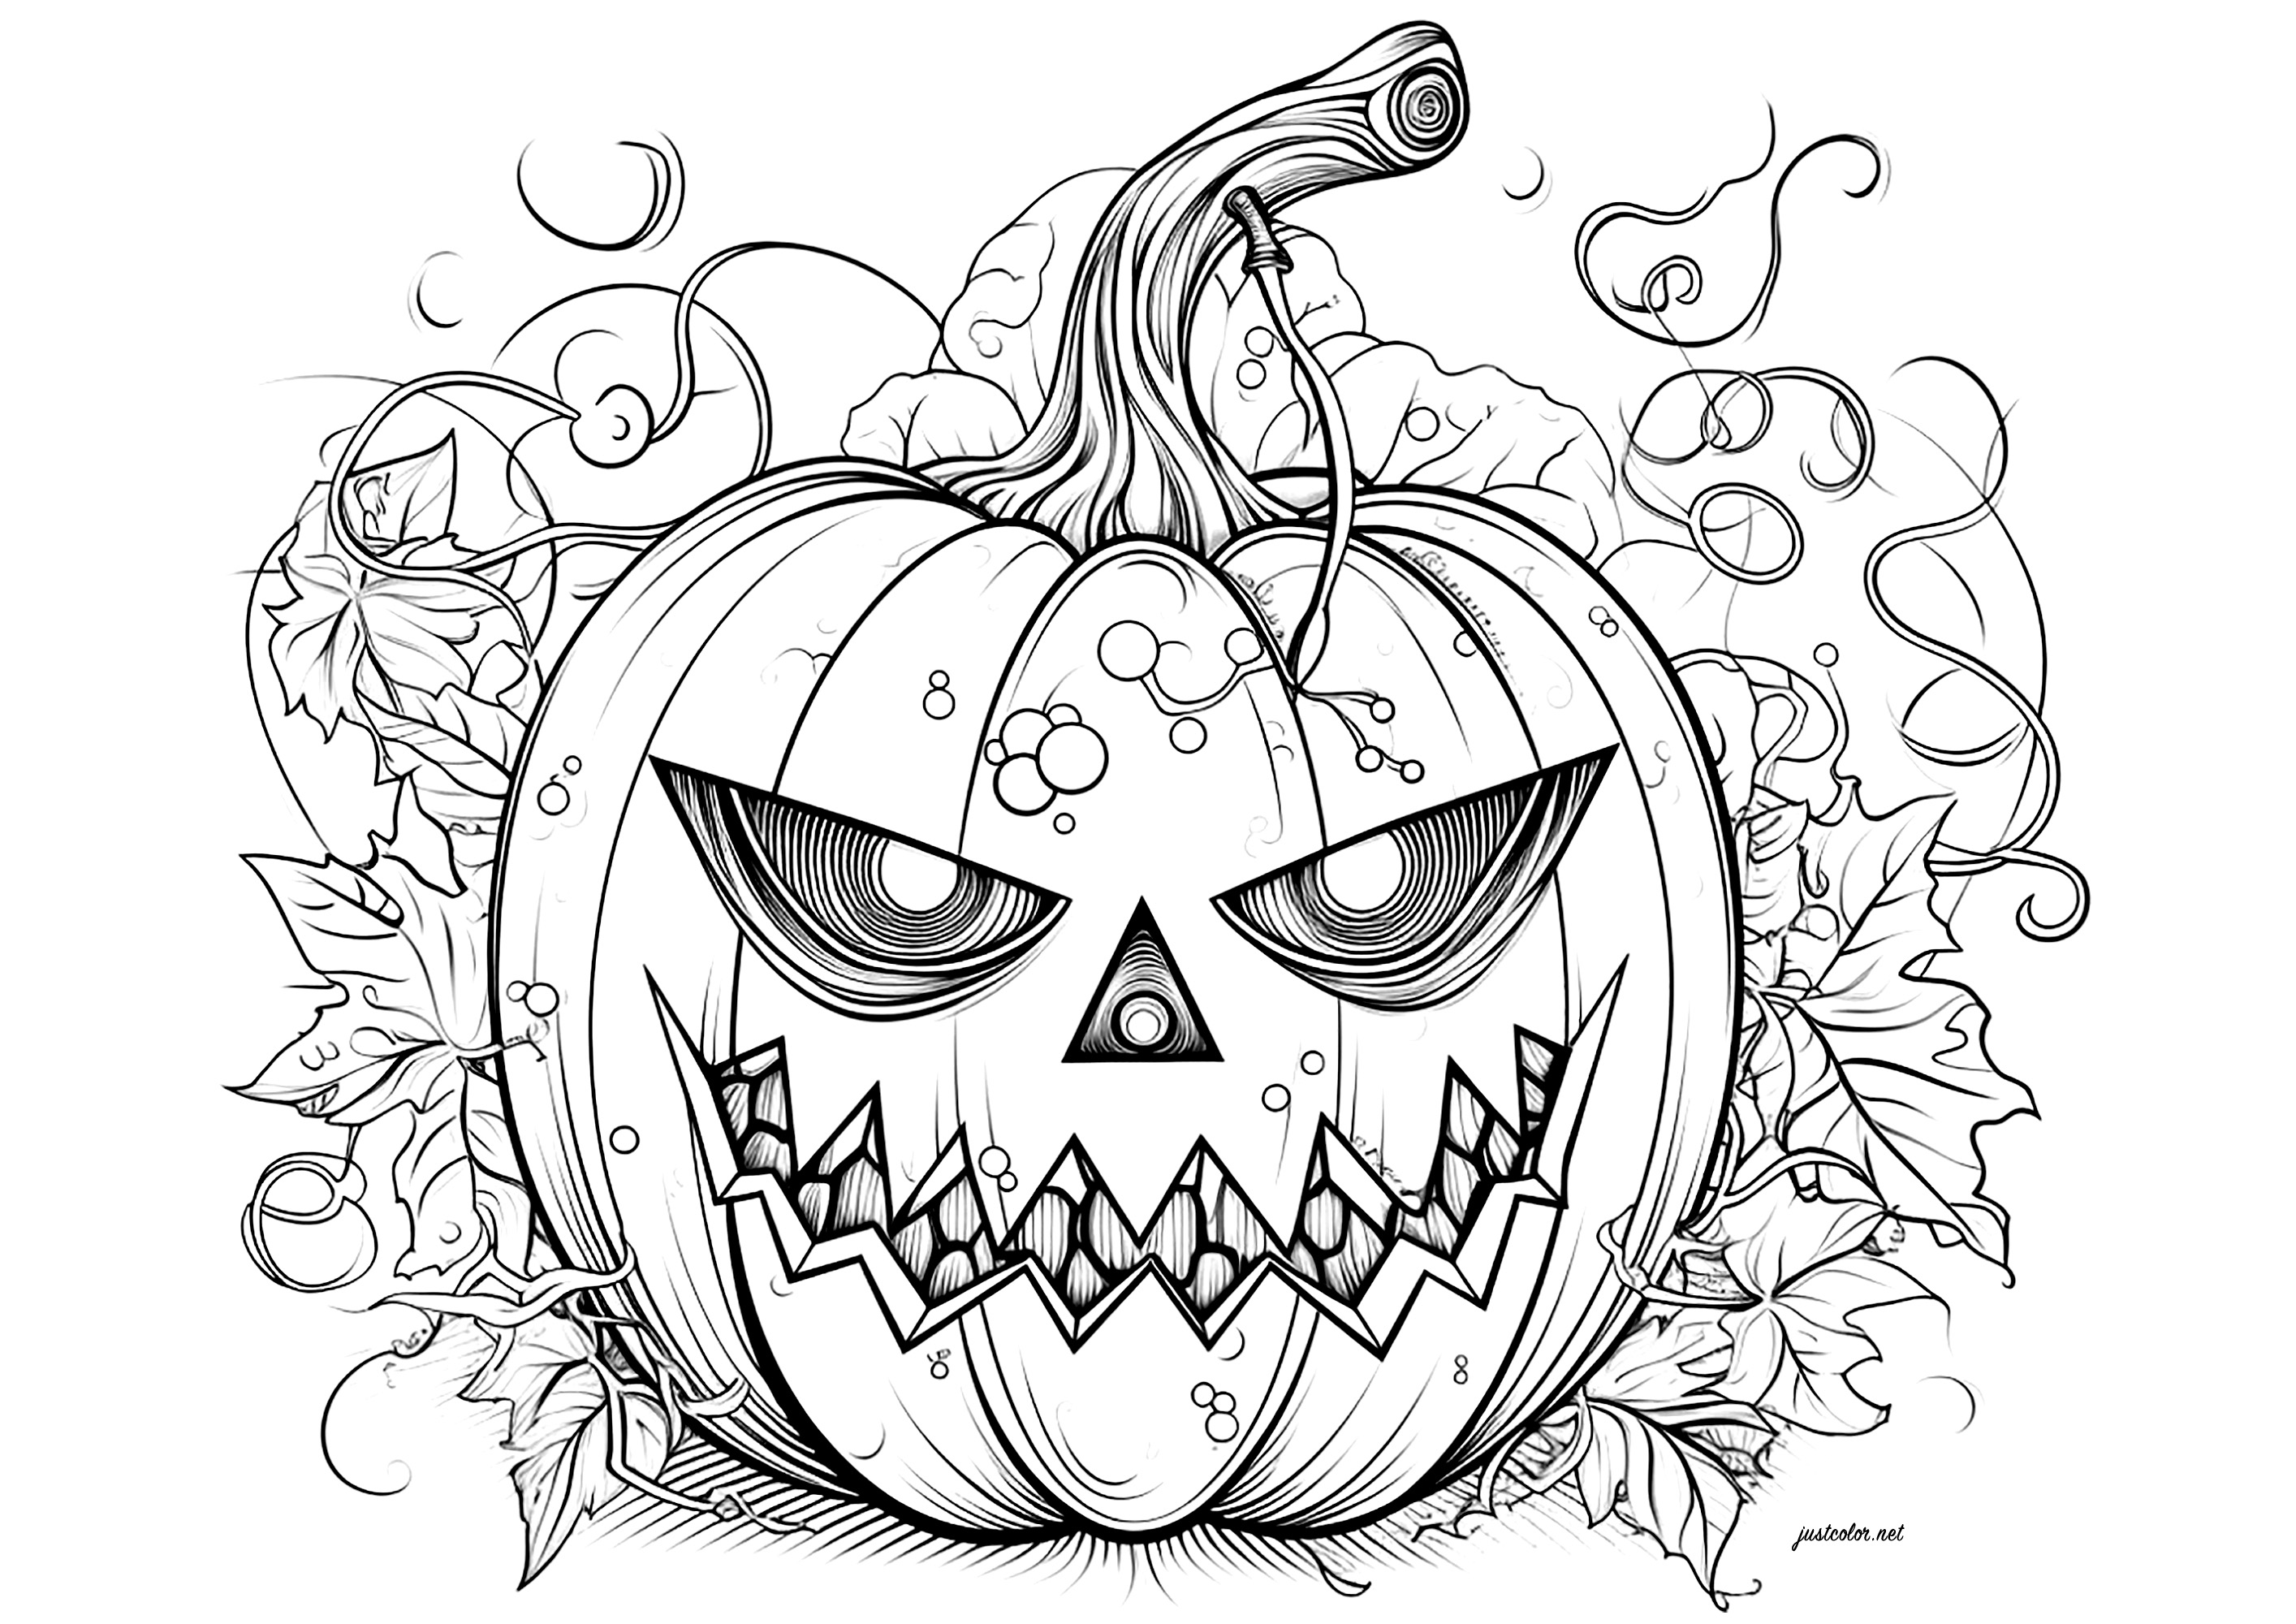 Spooky Halloween pumpkin. This pumpkin really does have a mournful, intriguing look ... also color the leaves and details in the background